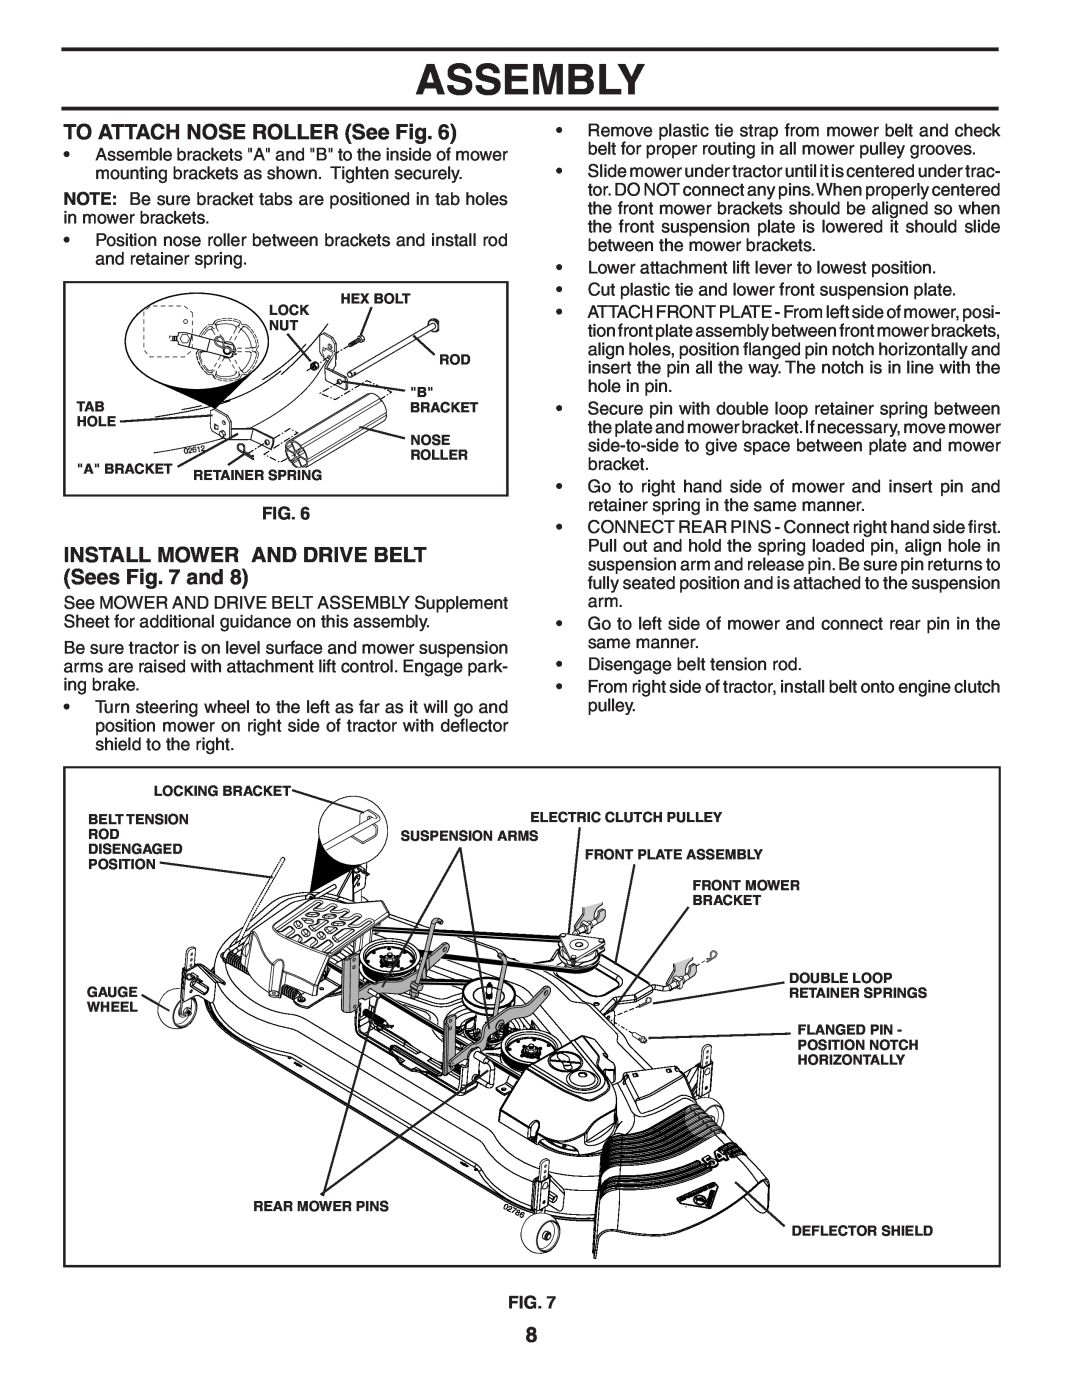 Poulan 194604 manual TO ATTACH NOSE ROLLER See Fig, INSTALL MOWER AND DRIVE BELT Sees and, Assembly 